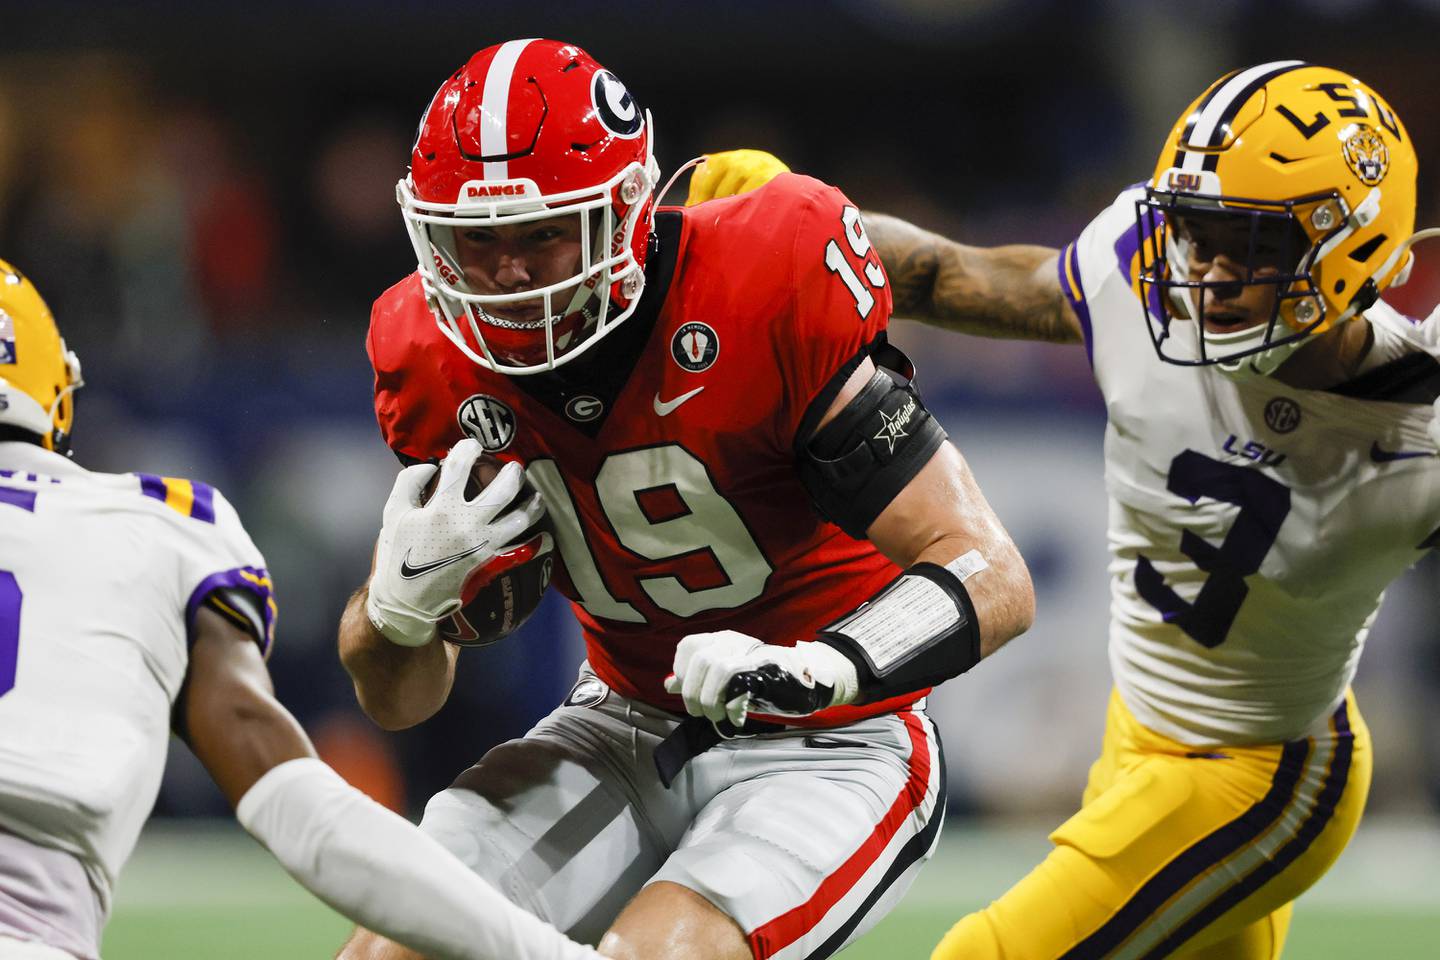 Georgia tight end Brock Bowers runs against LSU safety Greg Brooks Jr. during the second half of the SEC championship game on Dec. 3 at Mercedes-Benz Stadium in Atlanta.